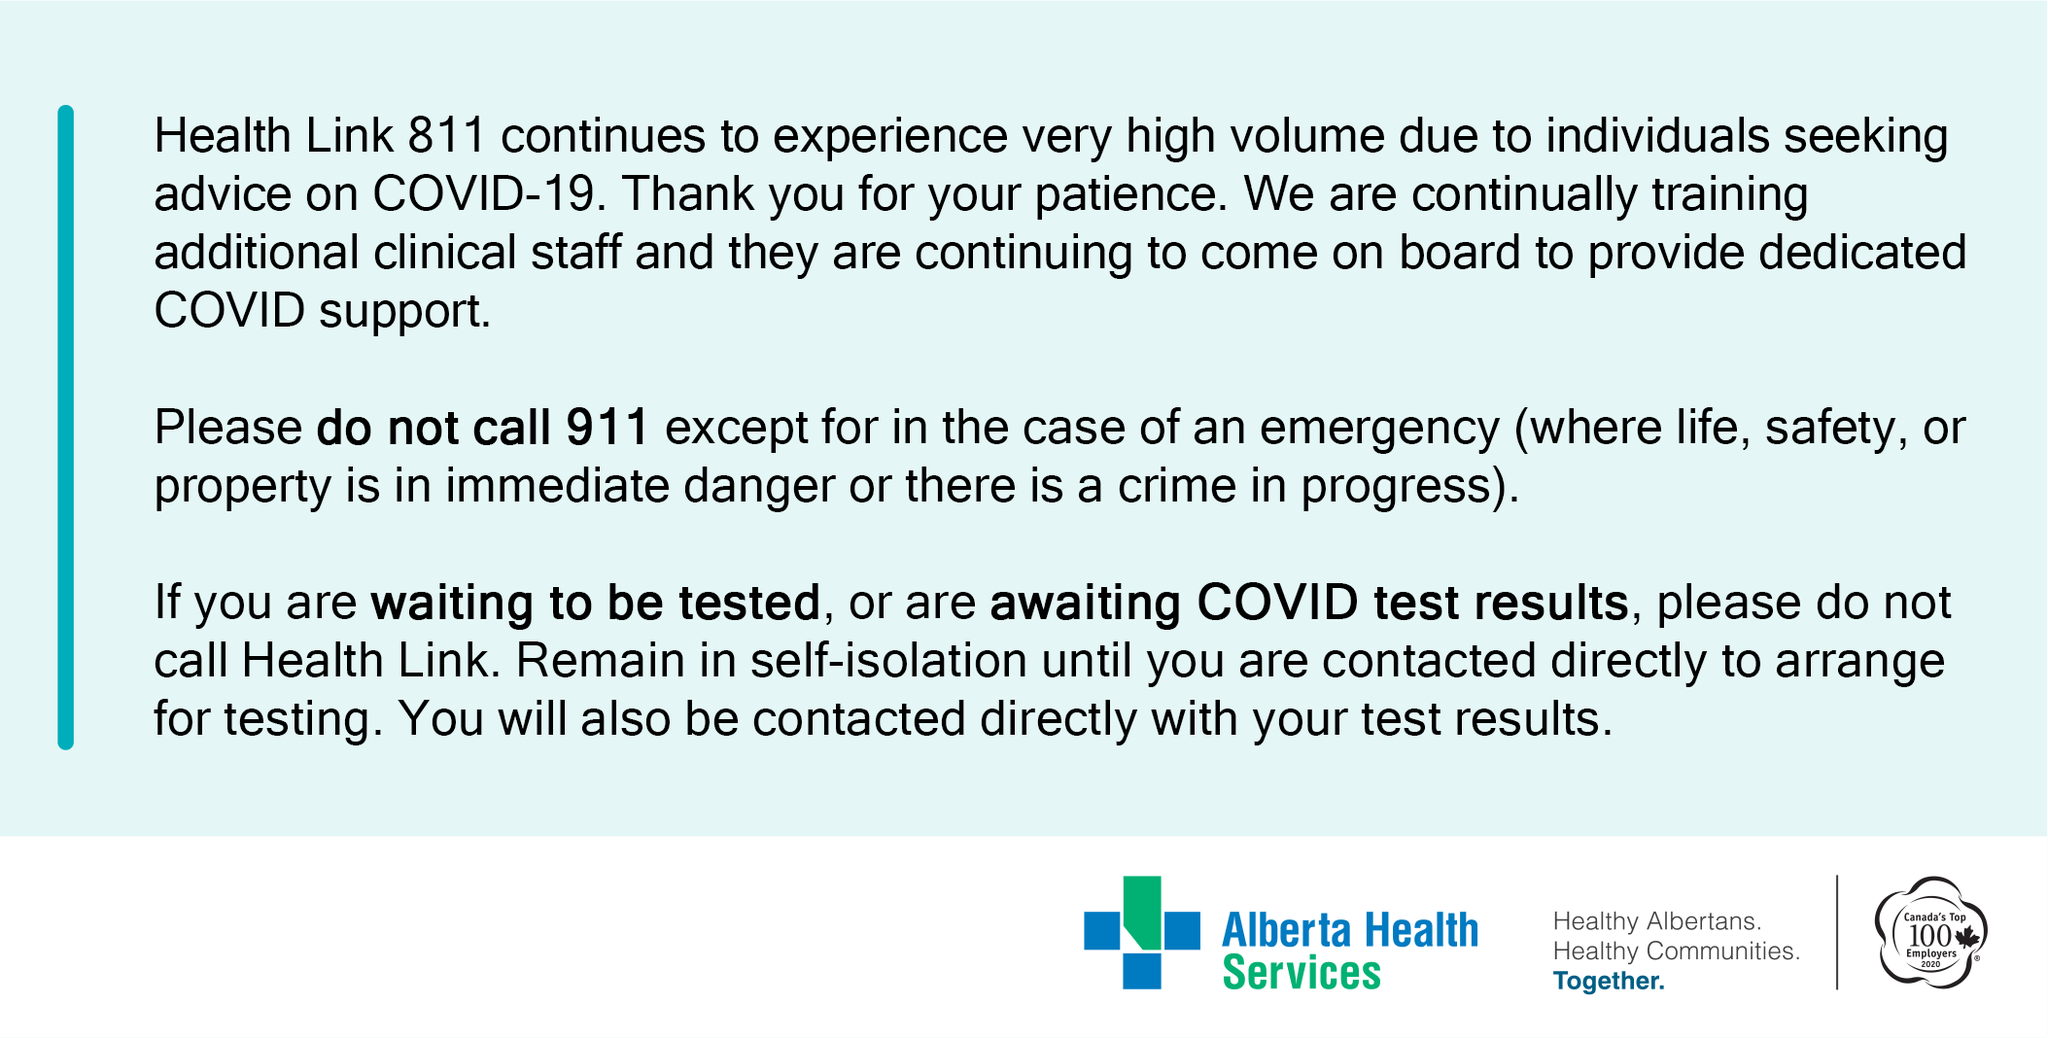 Alberta Health Services On Twitter You Can Help The Call Volumes By Considering Visiting Https T Co Rjzm42necz For Info If You Do Not Need A Health Assessment For Health Concerns Unrelated To Covid 19 Consider